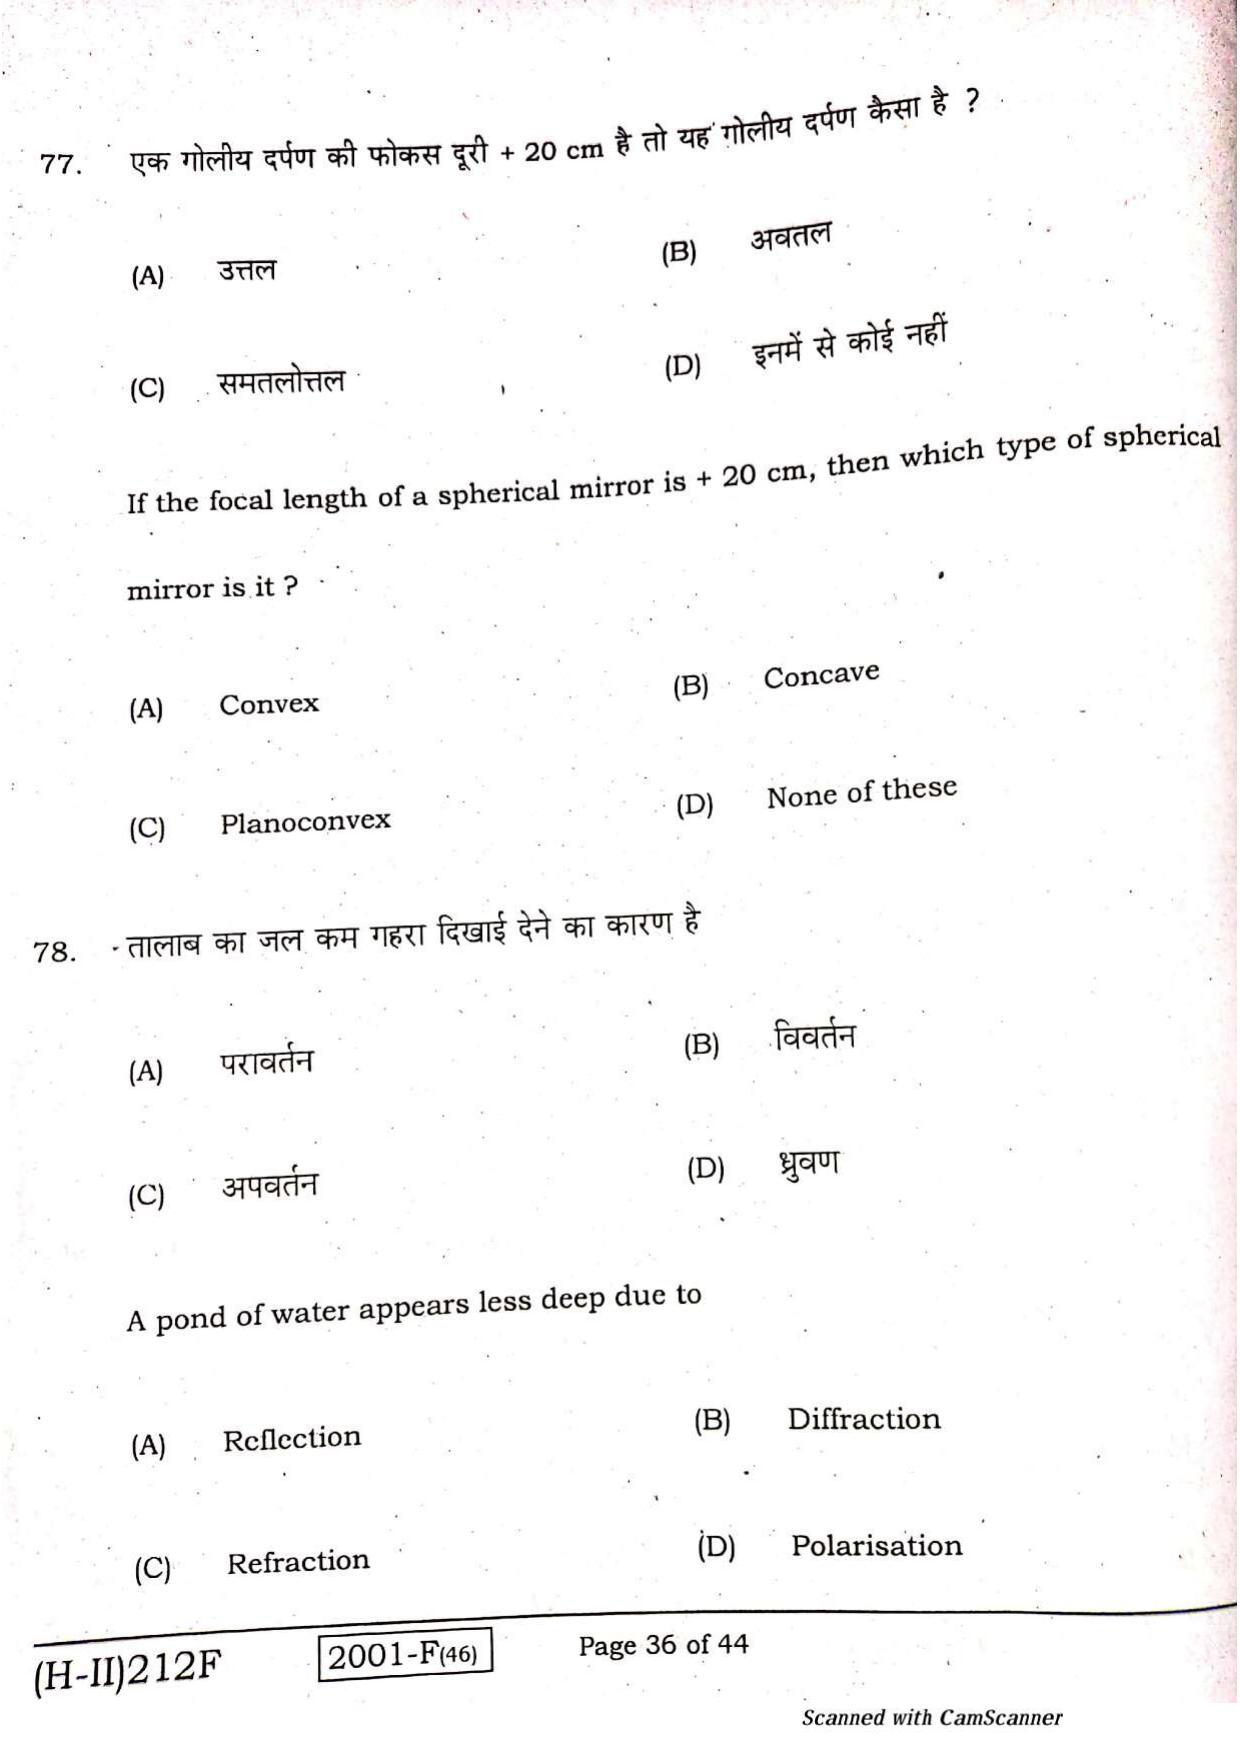 Bihar Board Class 10 Science 2021 (2nd Sitting) Question Paper - Page 34